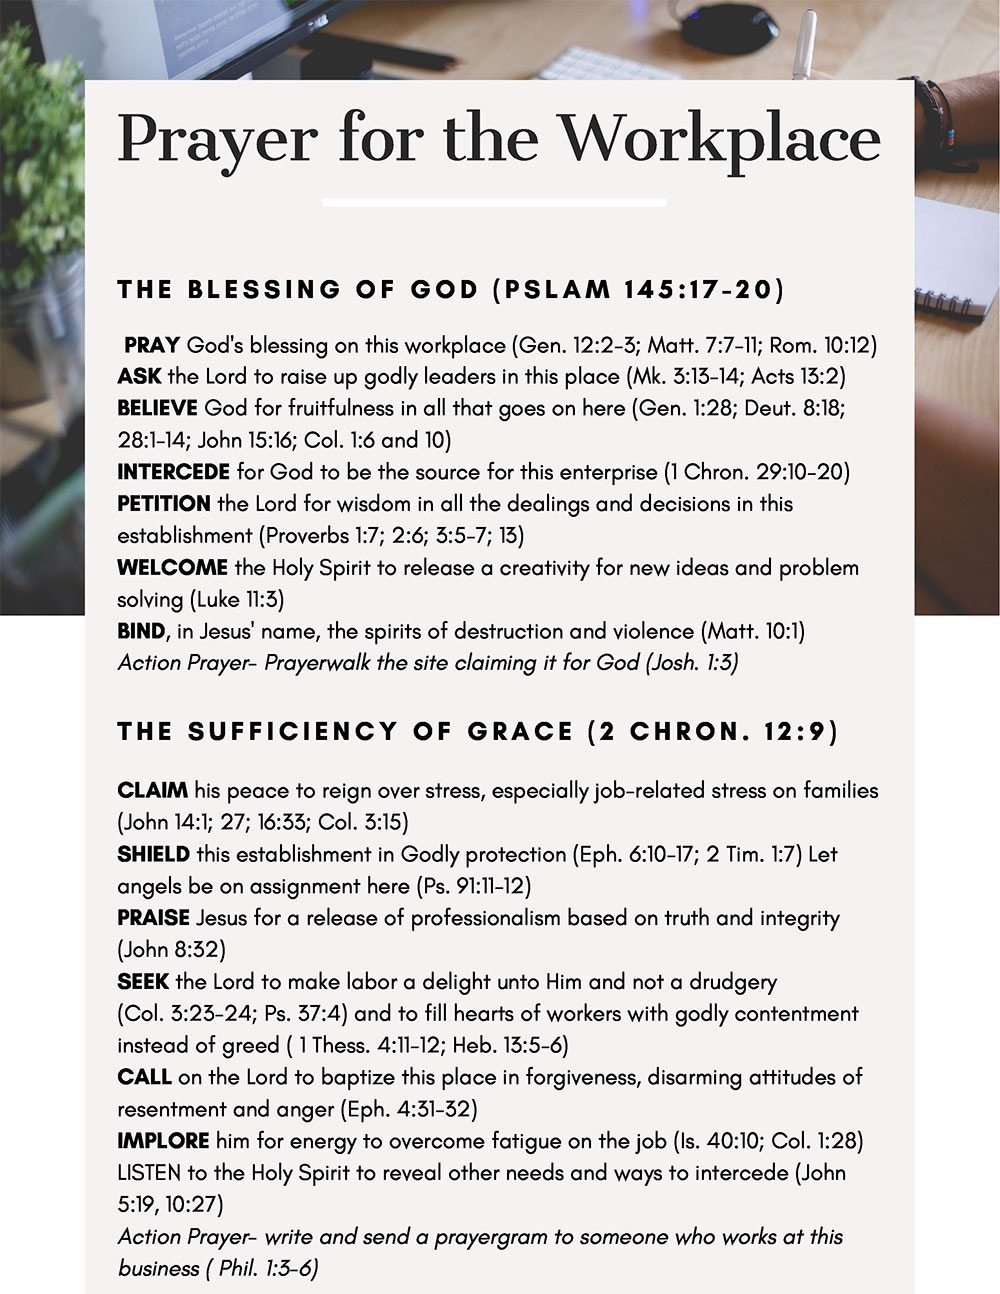 Free Prayer Resources-prayer for the workplace